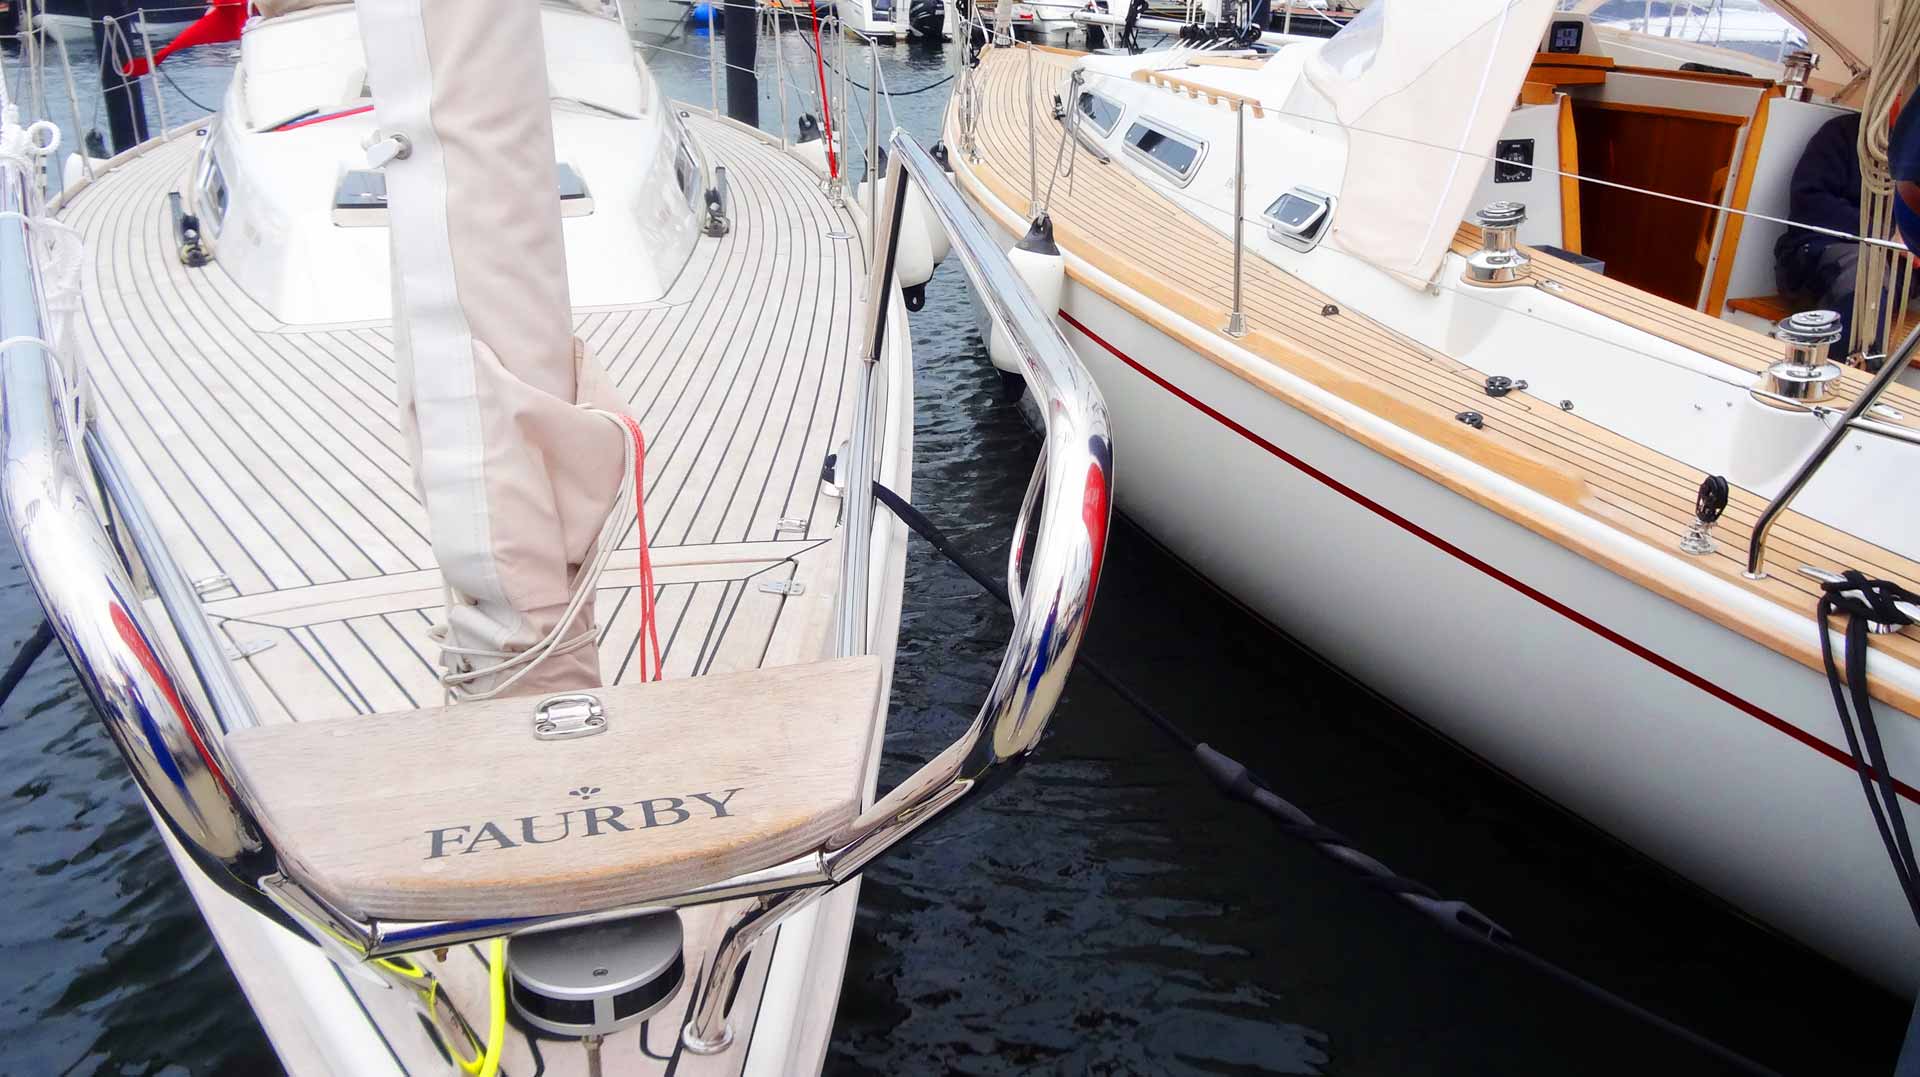 The Faurby 36 and 36.3 have been my favorite Yachts at the Boat Show